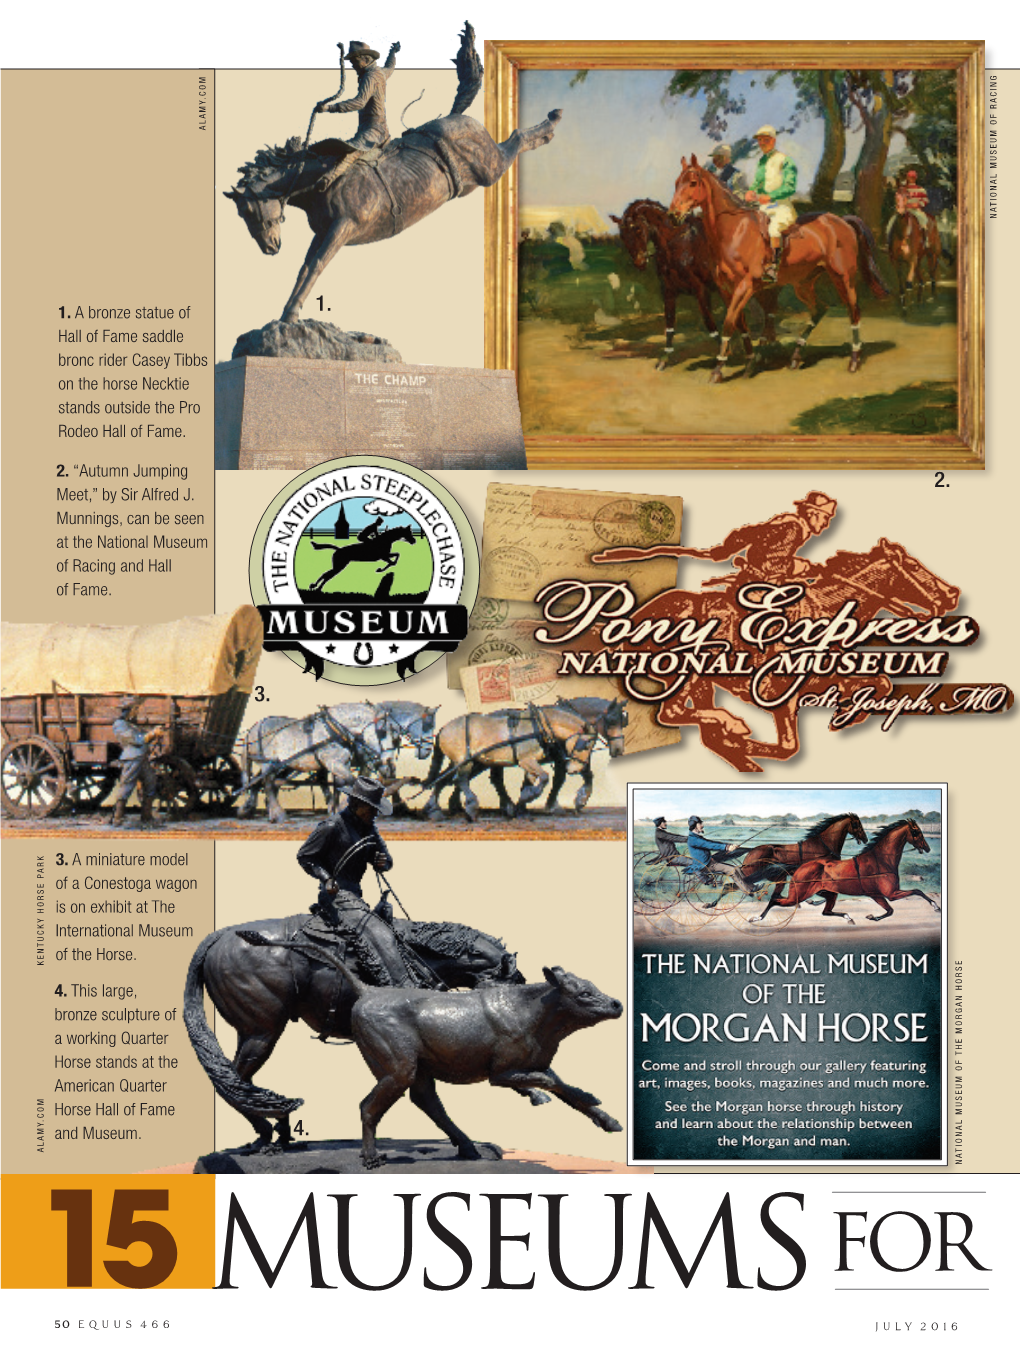 1. a Bronze Statue of Hall of Fame Saddle Bronc Rider Casey Tibbs On